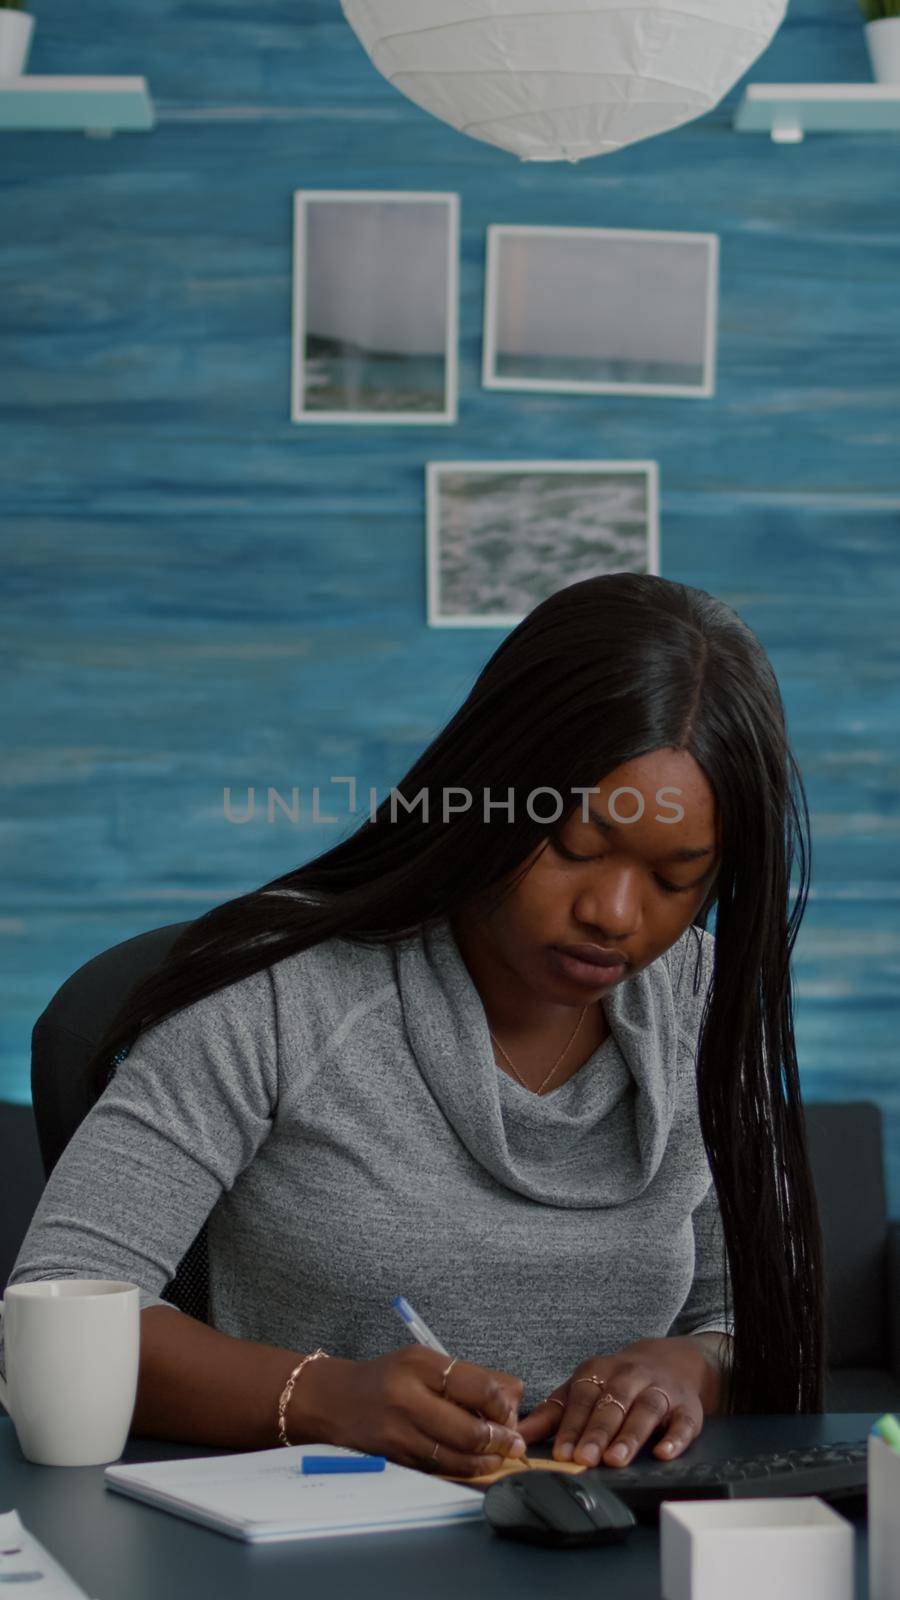 Student writing business ideas on sticky notes putting on computer working at school homework, using elearning platform during university online course. Black woman sitting at desk in living room